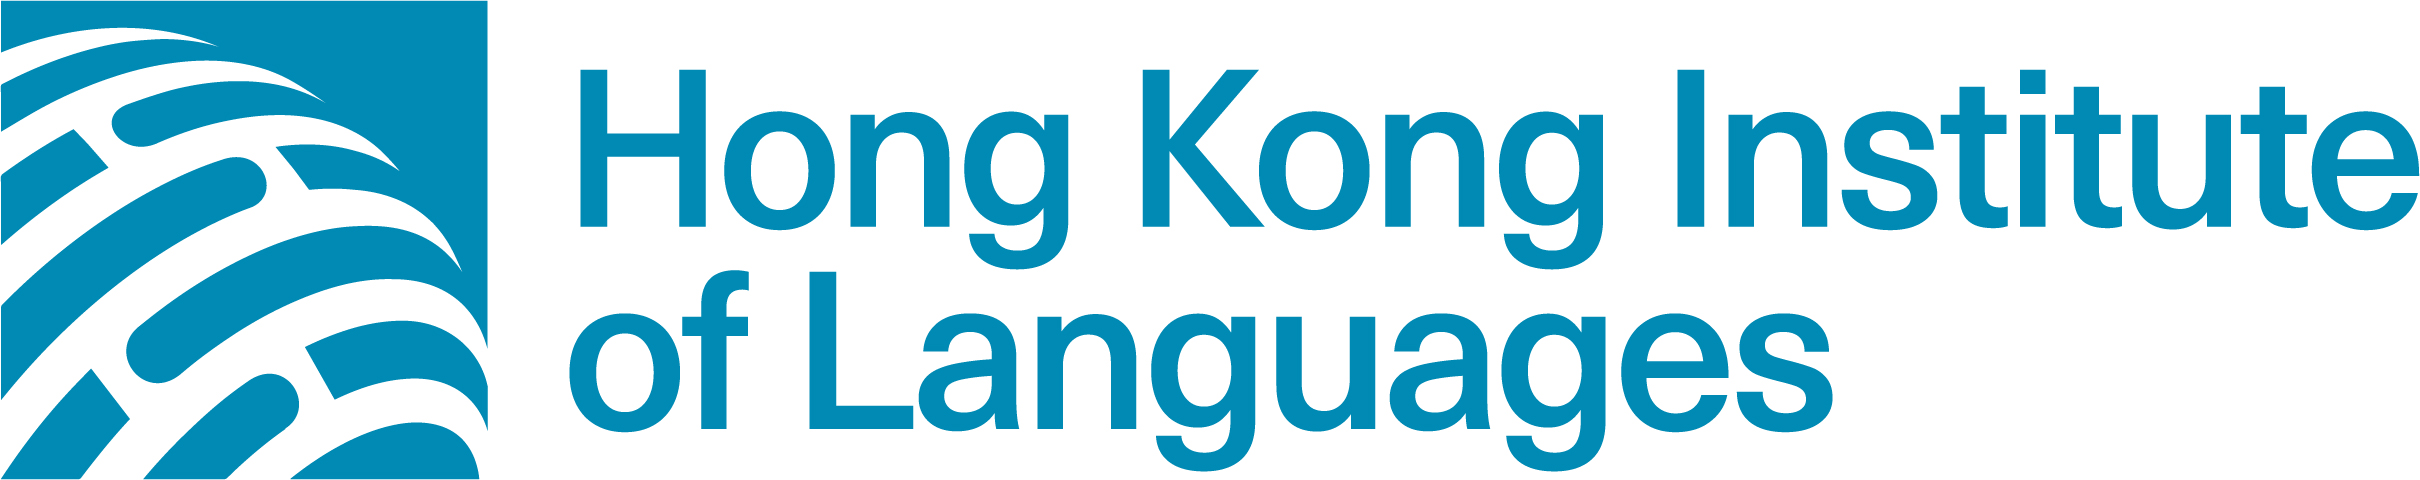 Hong Kong Institute of Languages